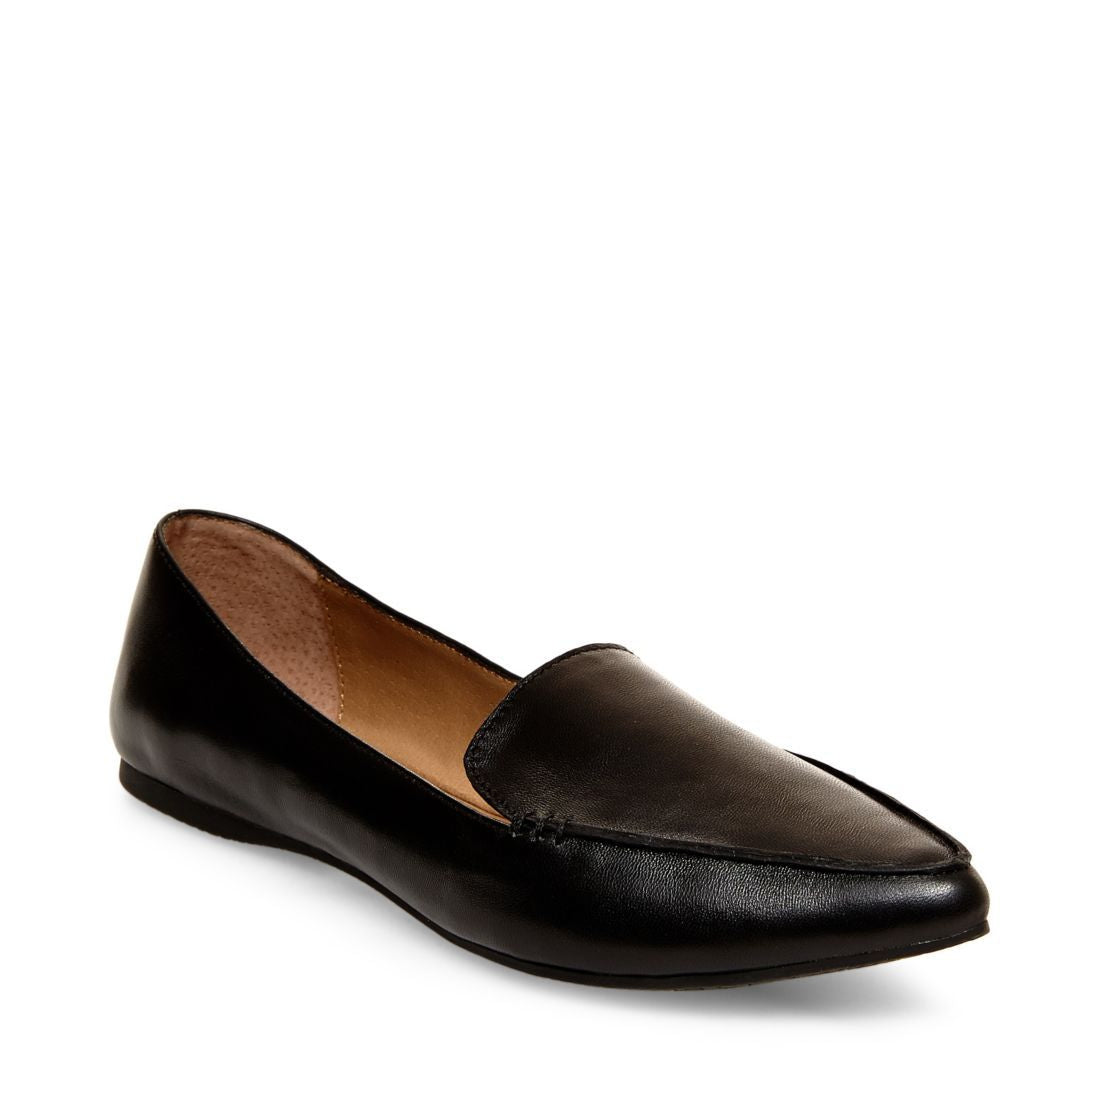 FEATHER Black Leather Women's Loafers | Women's Designer Loafers ...